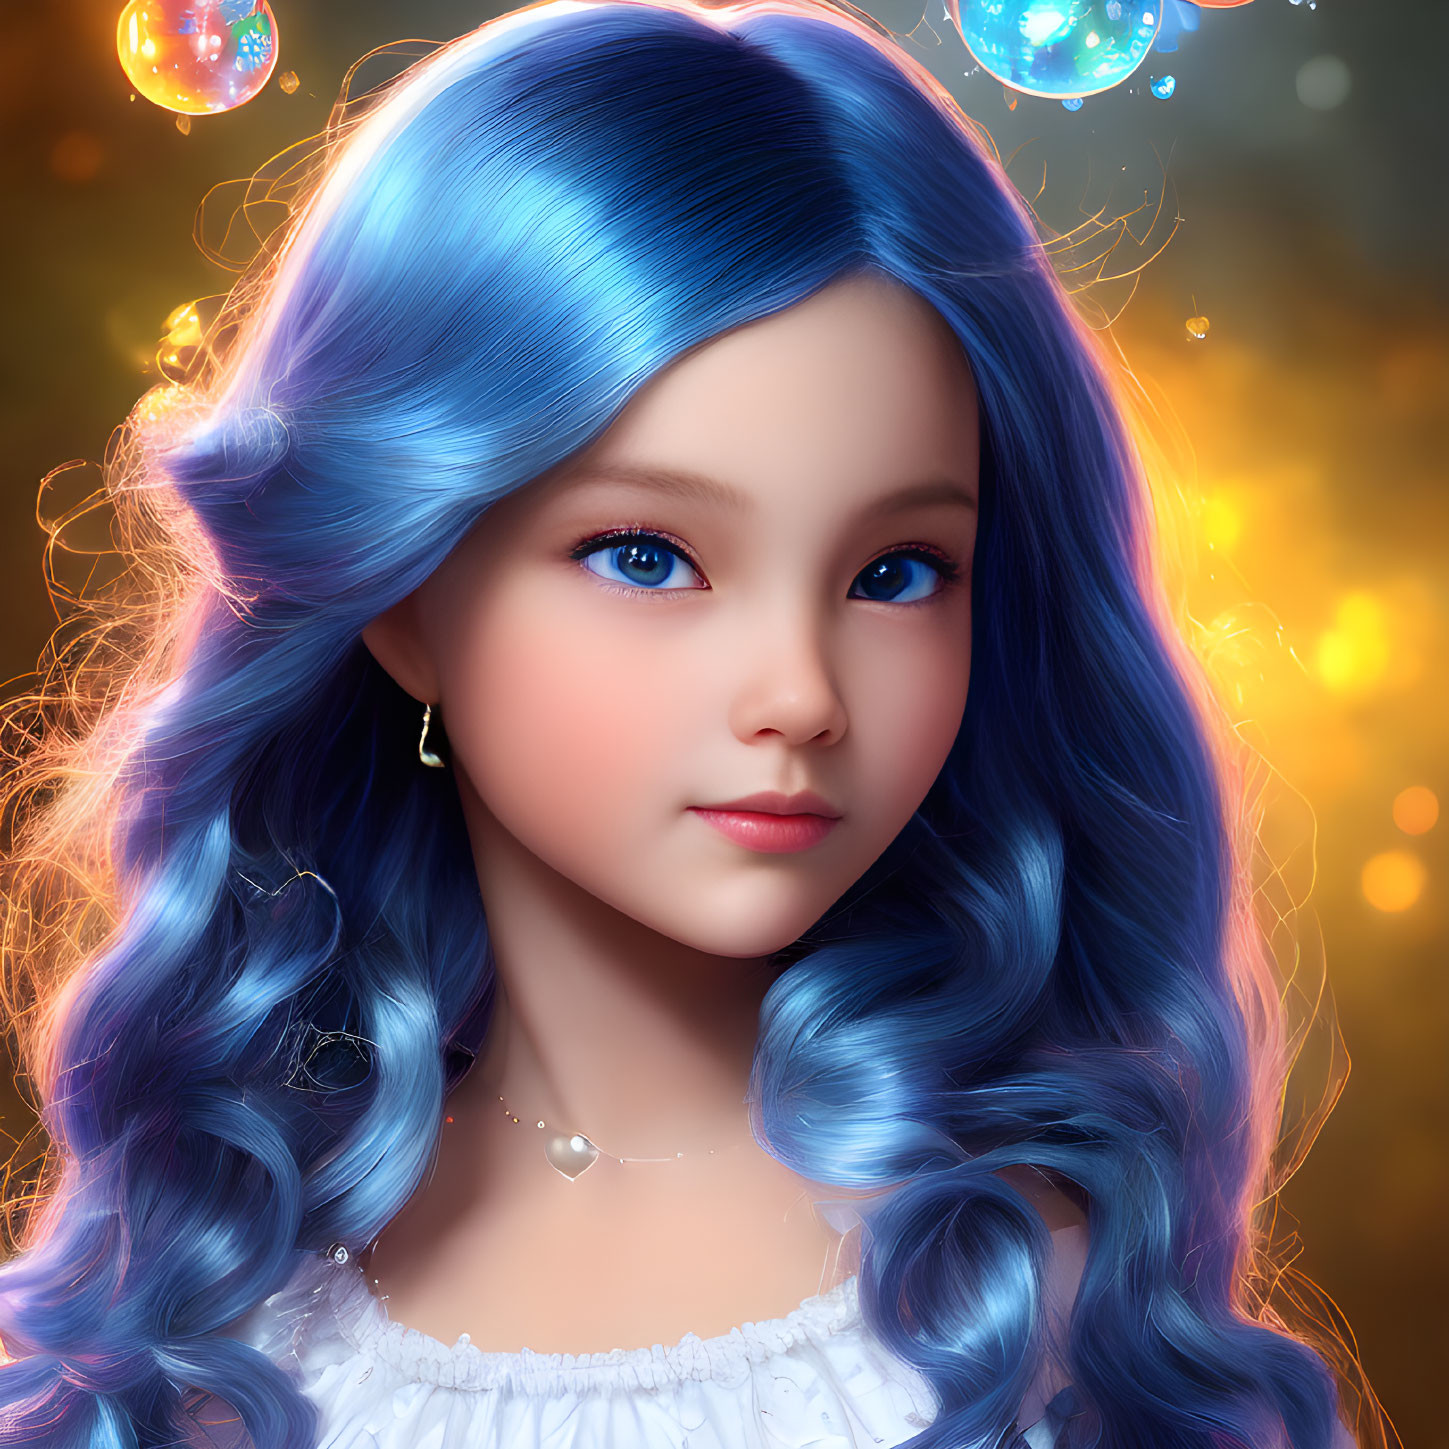 Vibrant blue hair girl with glowing orbs on warm bokeh background